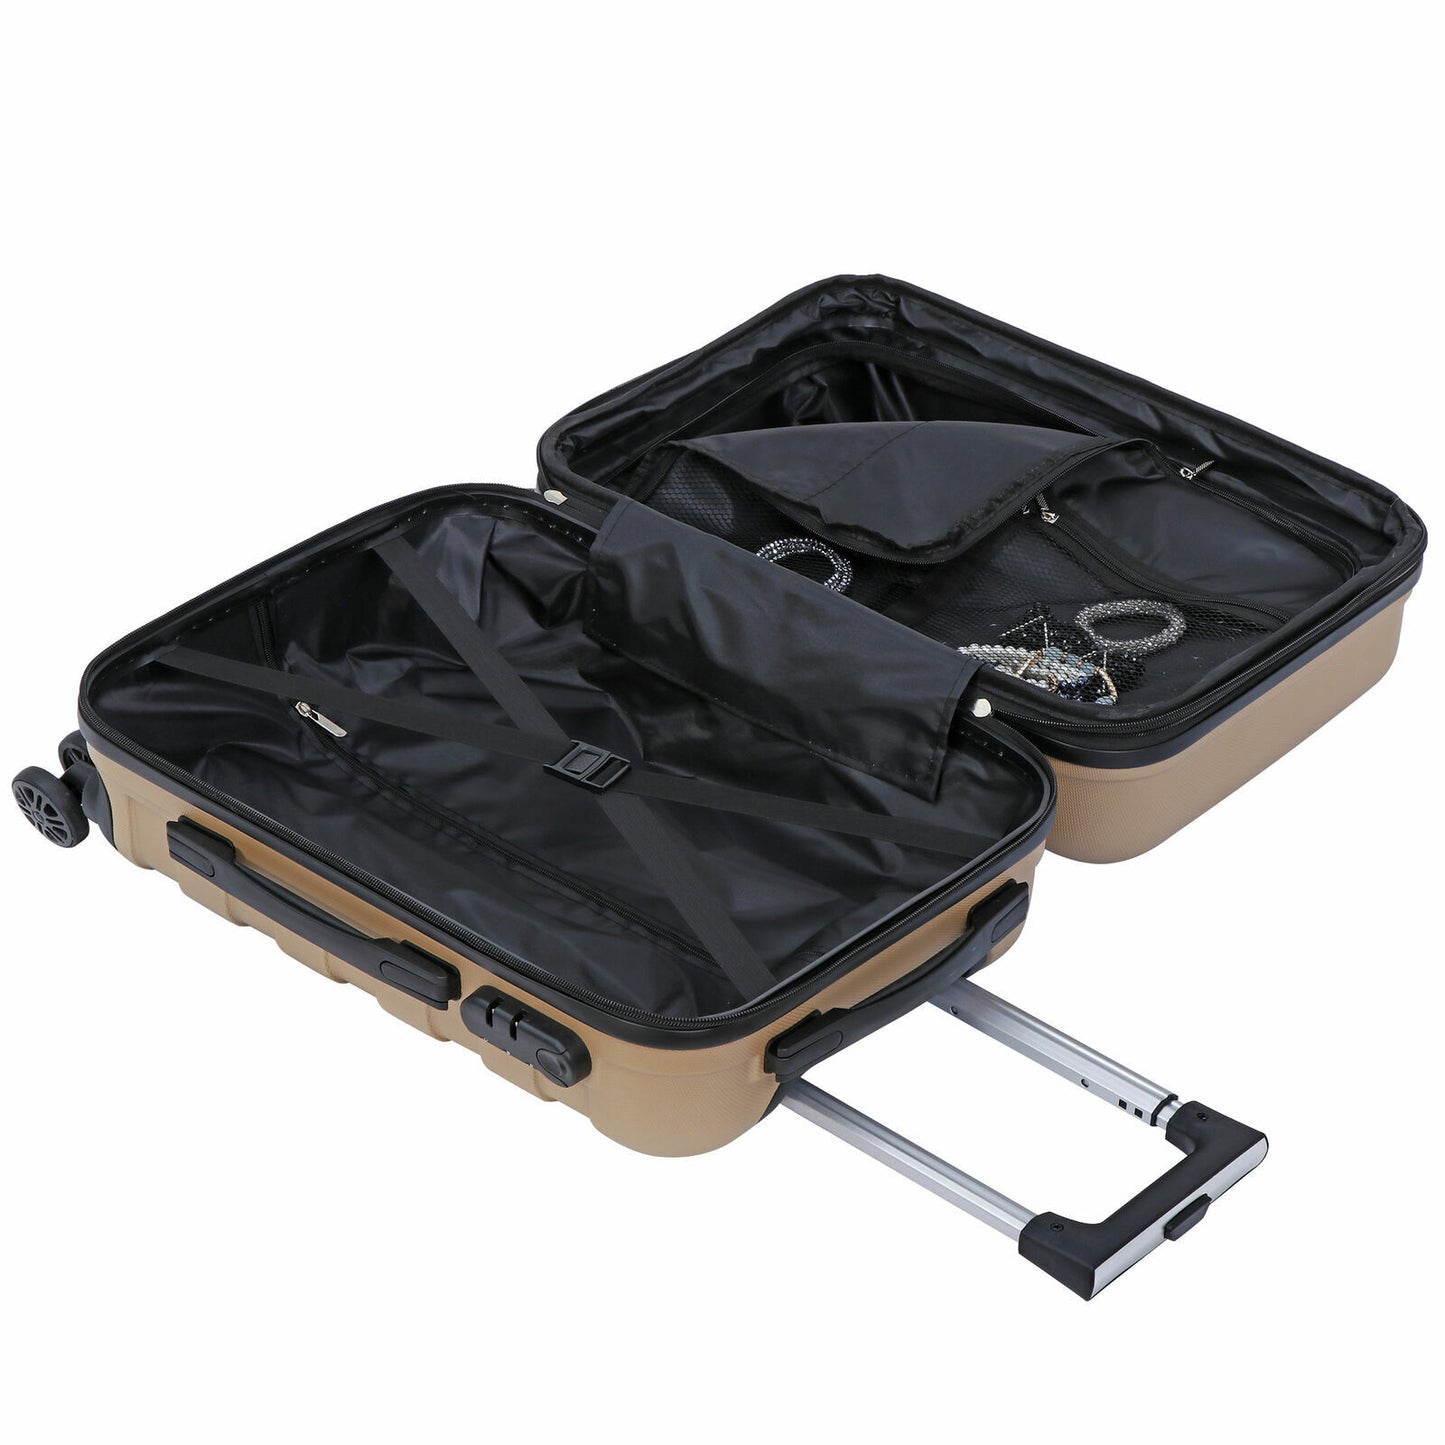 21" Champagne Travel Carry-on Luggage Trolley Suitcase Hardside Spinner Suitcase